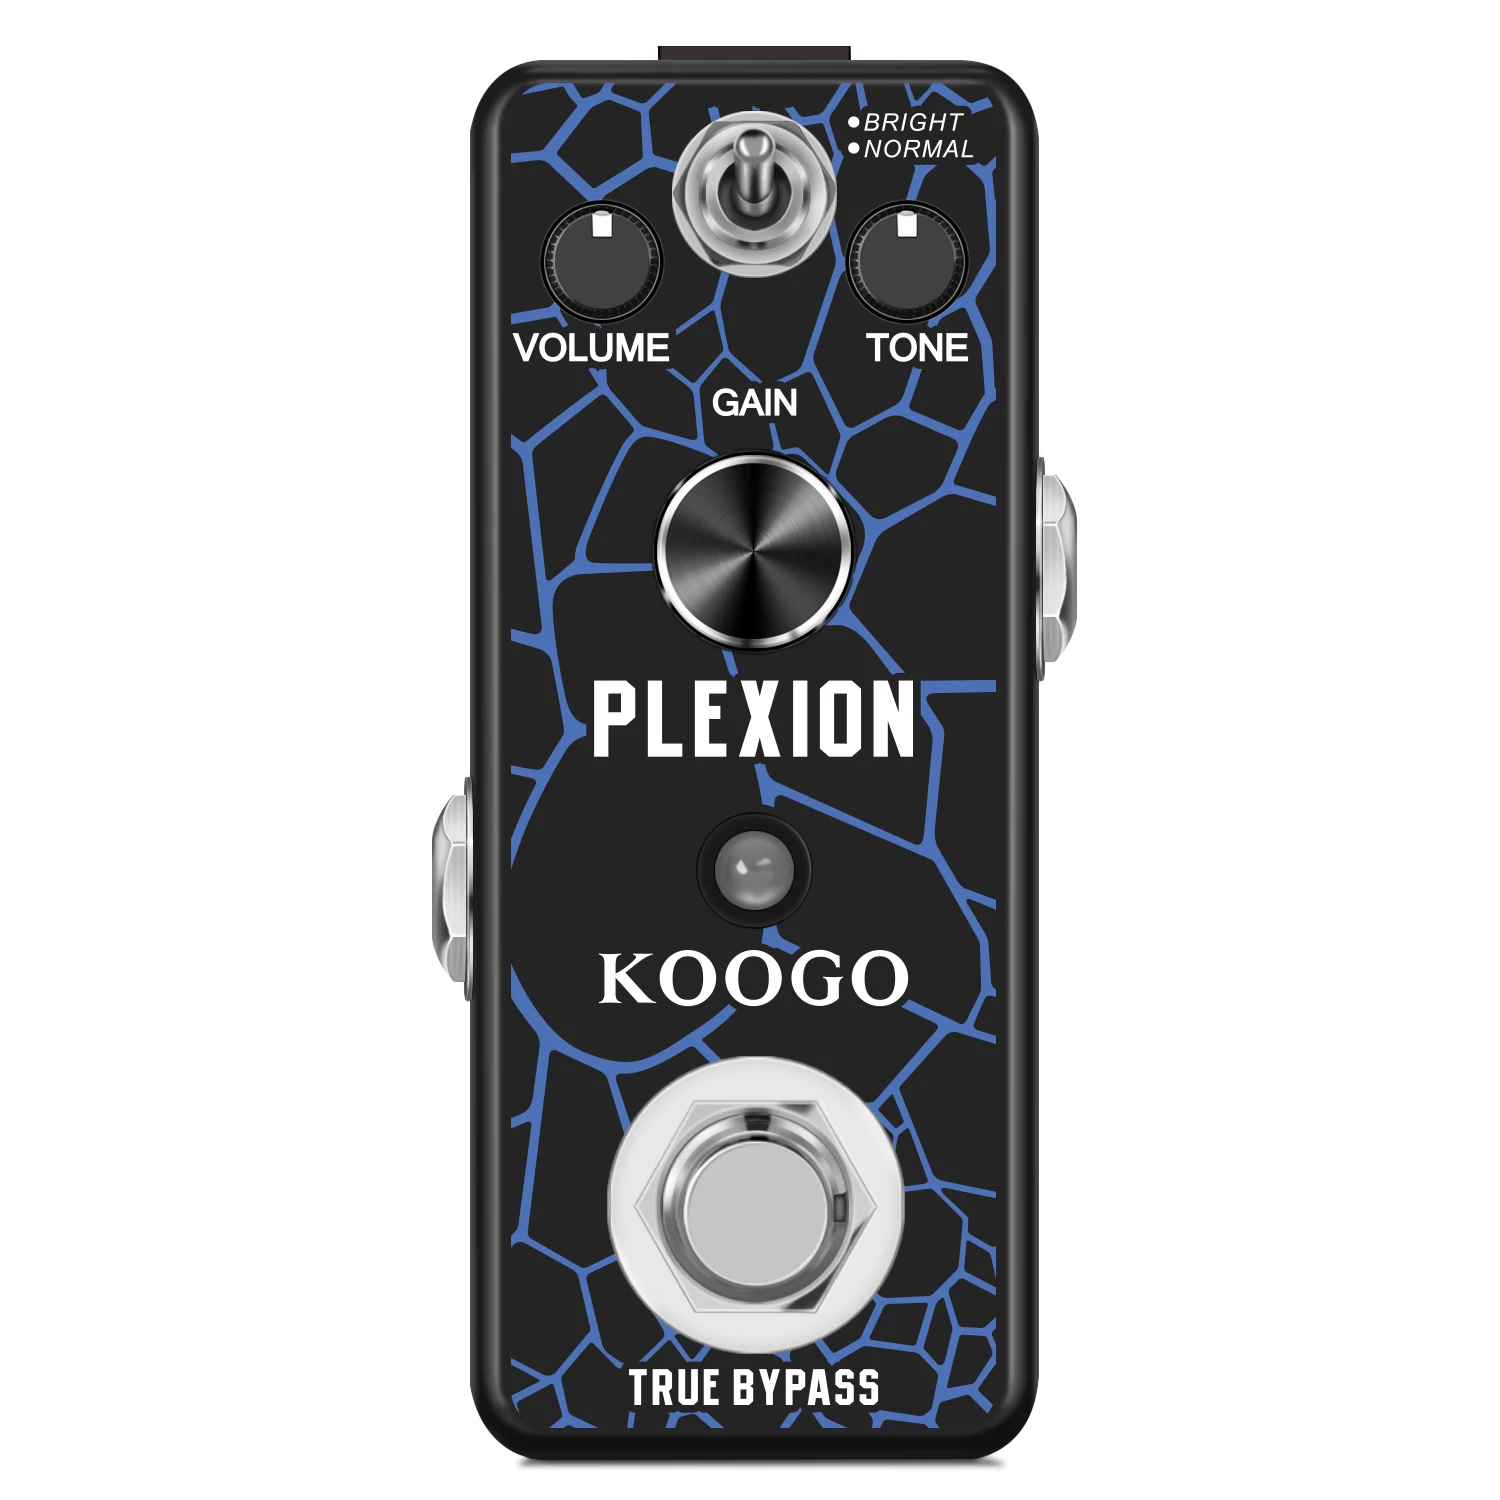 

Koogo Guitar Distortion Pedal Plexion Effects Pedals with Bright & Normal Working Modes Mini Size True Bypass LEF-324